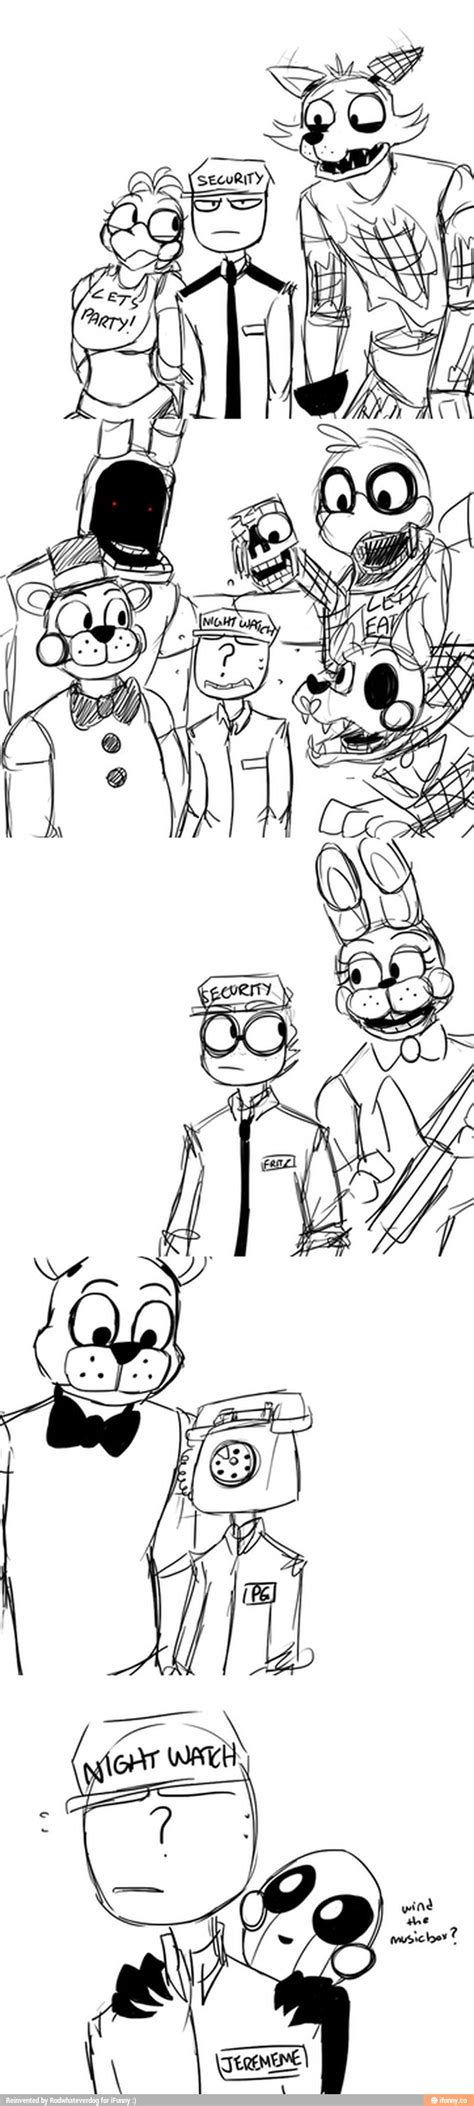 Securitynight Guards With Their Favorite Animatronics Cute